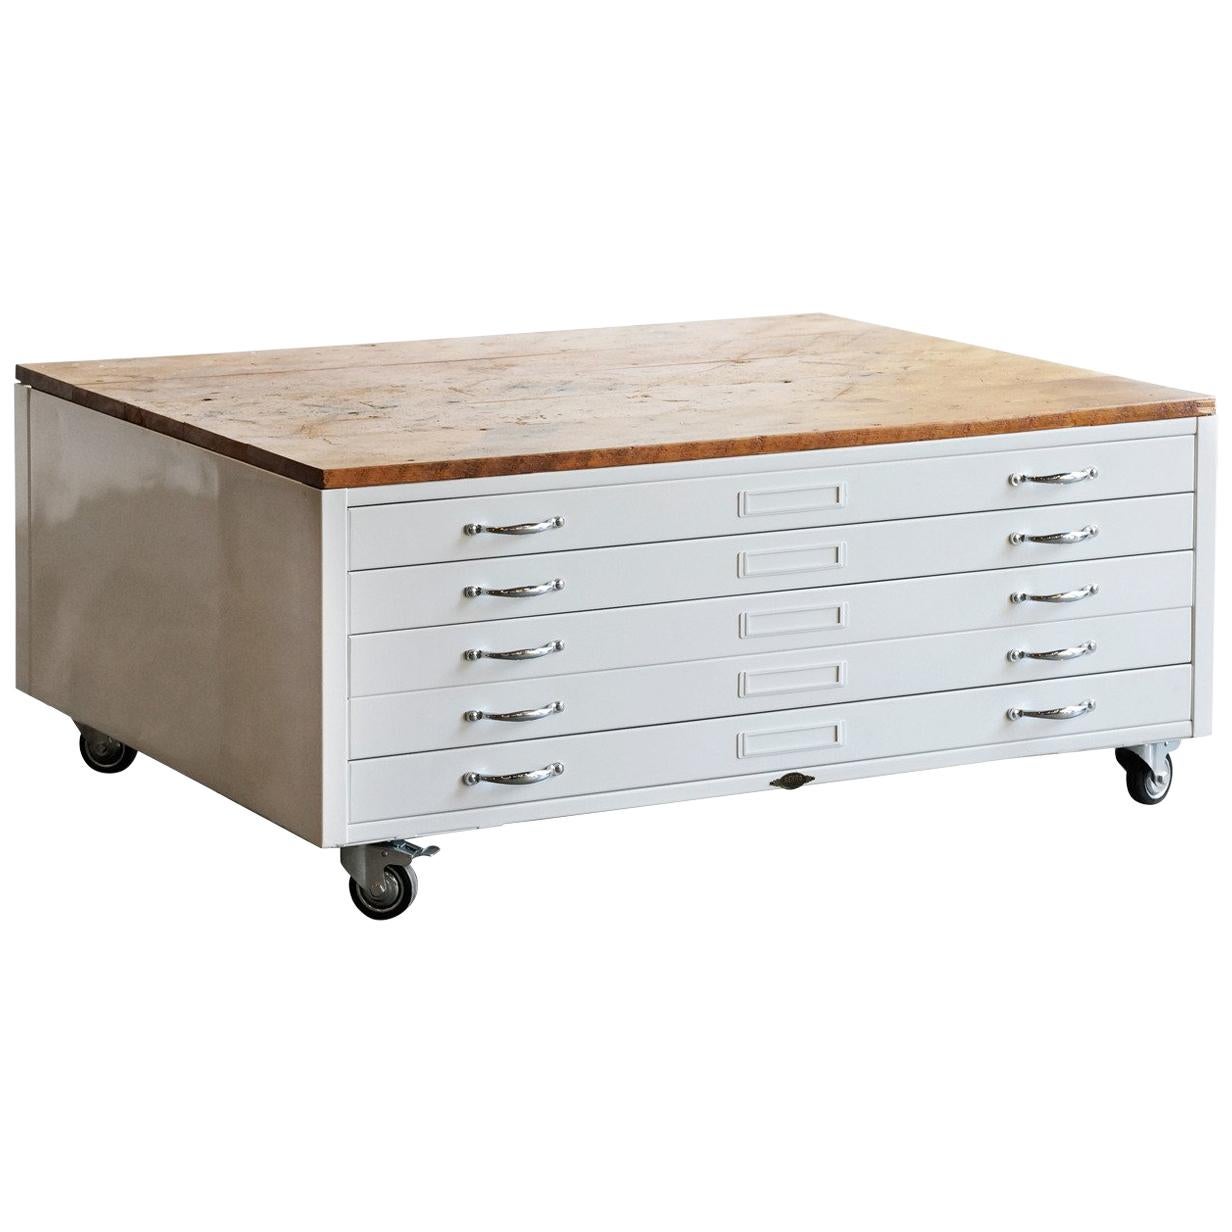 Flat File Coffee Table in High Gloss White with Reclaimed Wood For Sale